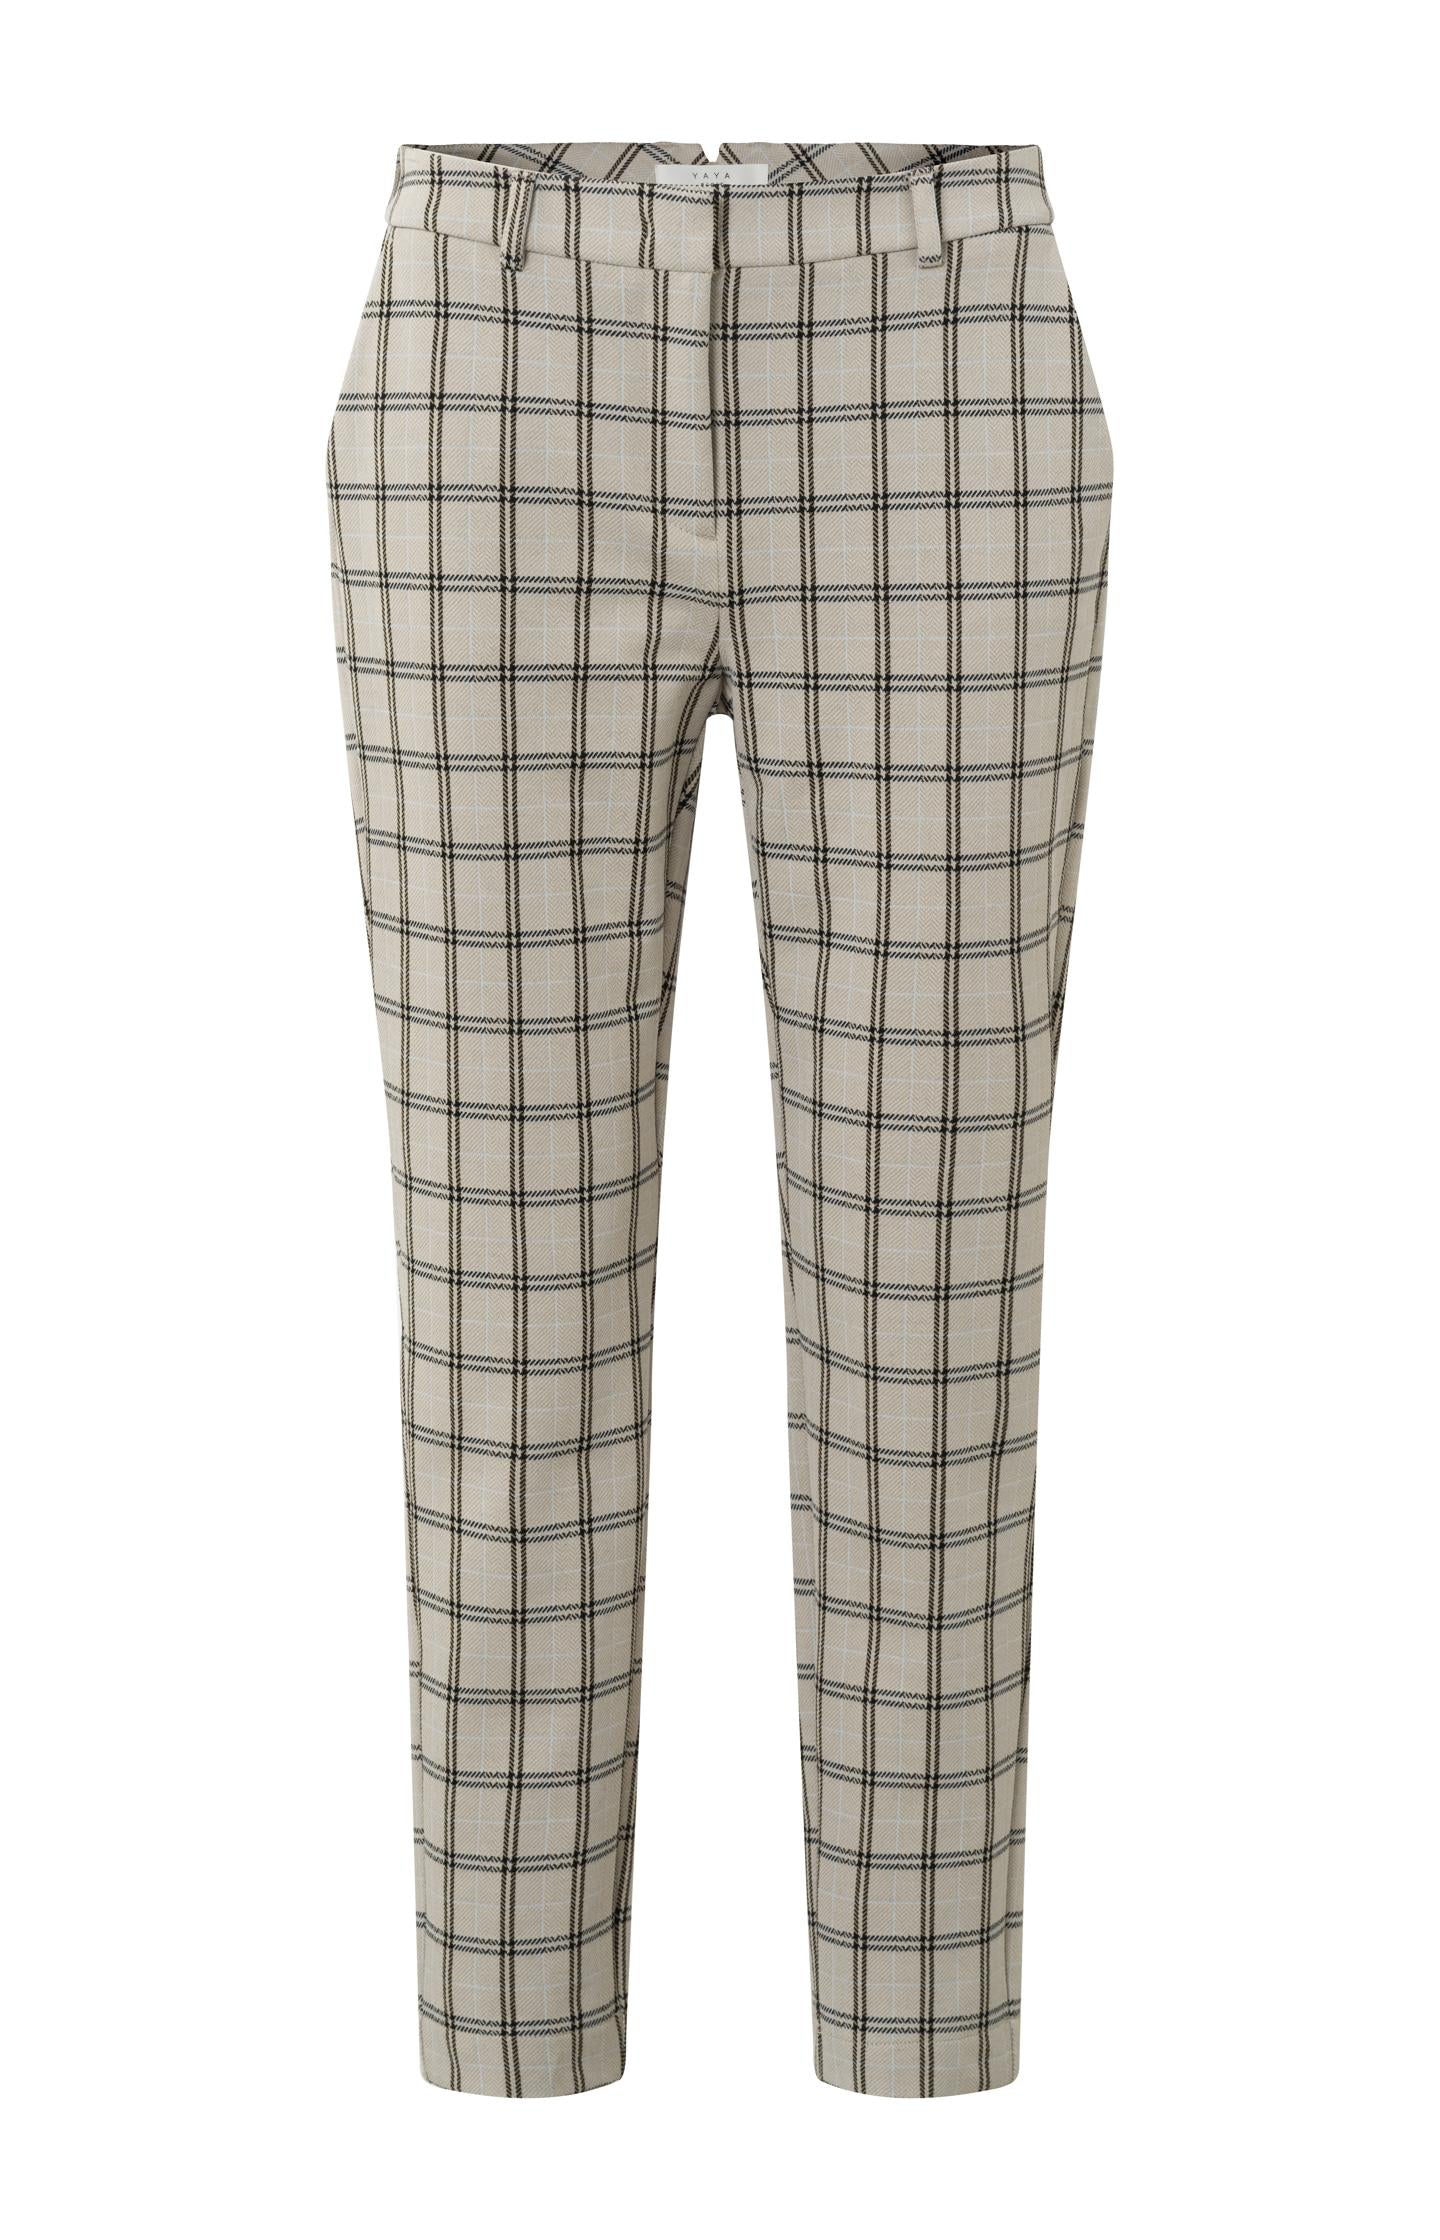 Chino trousers with straight leg, pockets and check print - Type: product